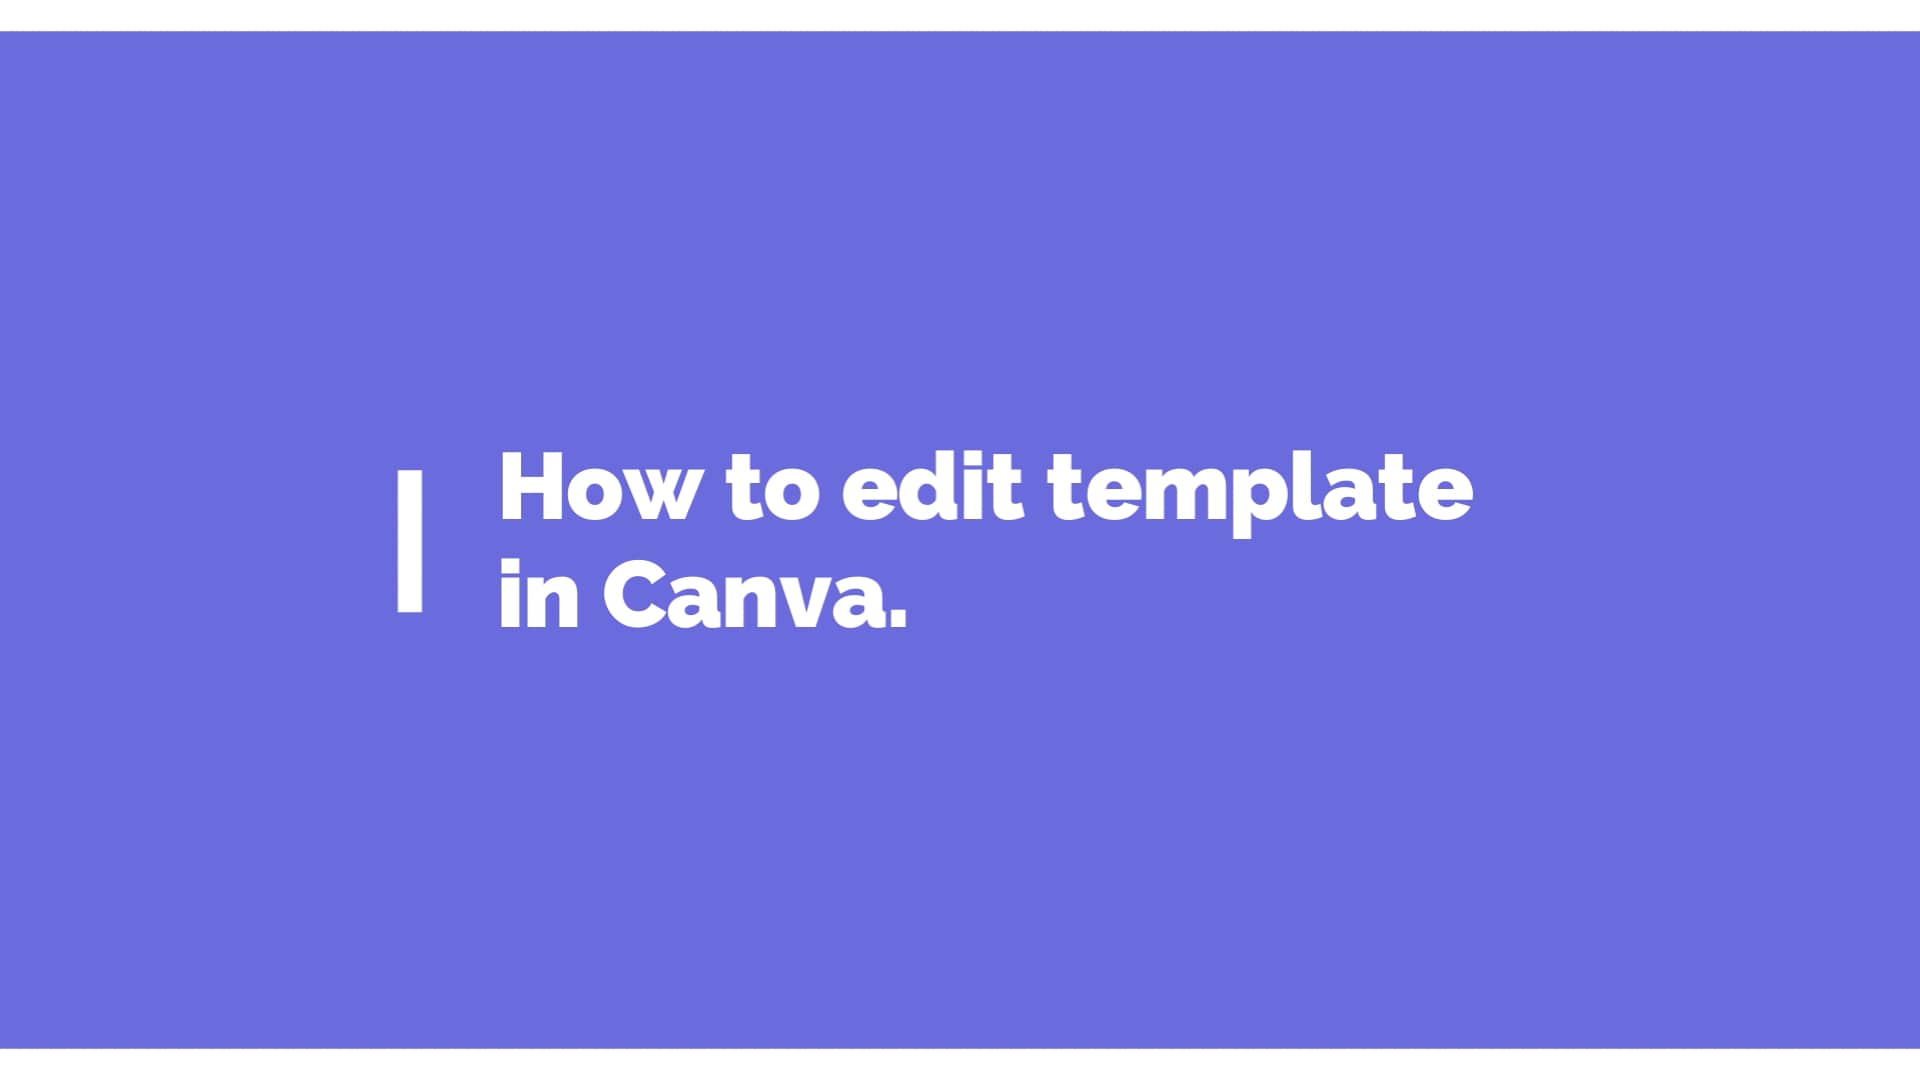 how-to-edit-canva-template-on-vimeo